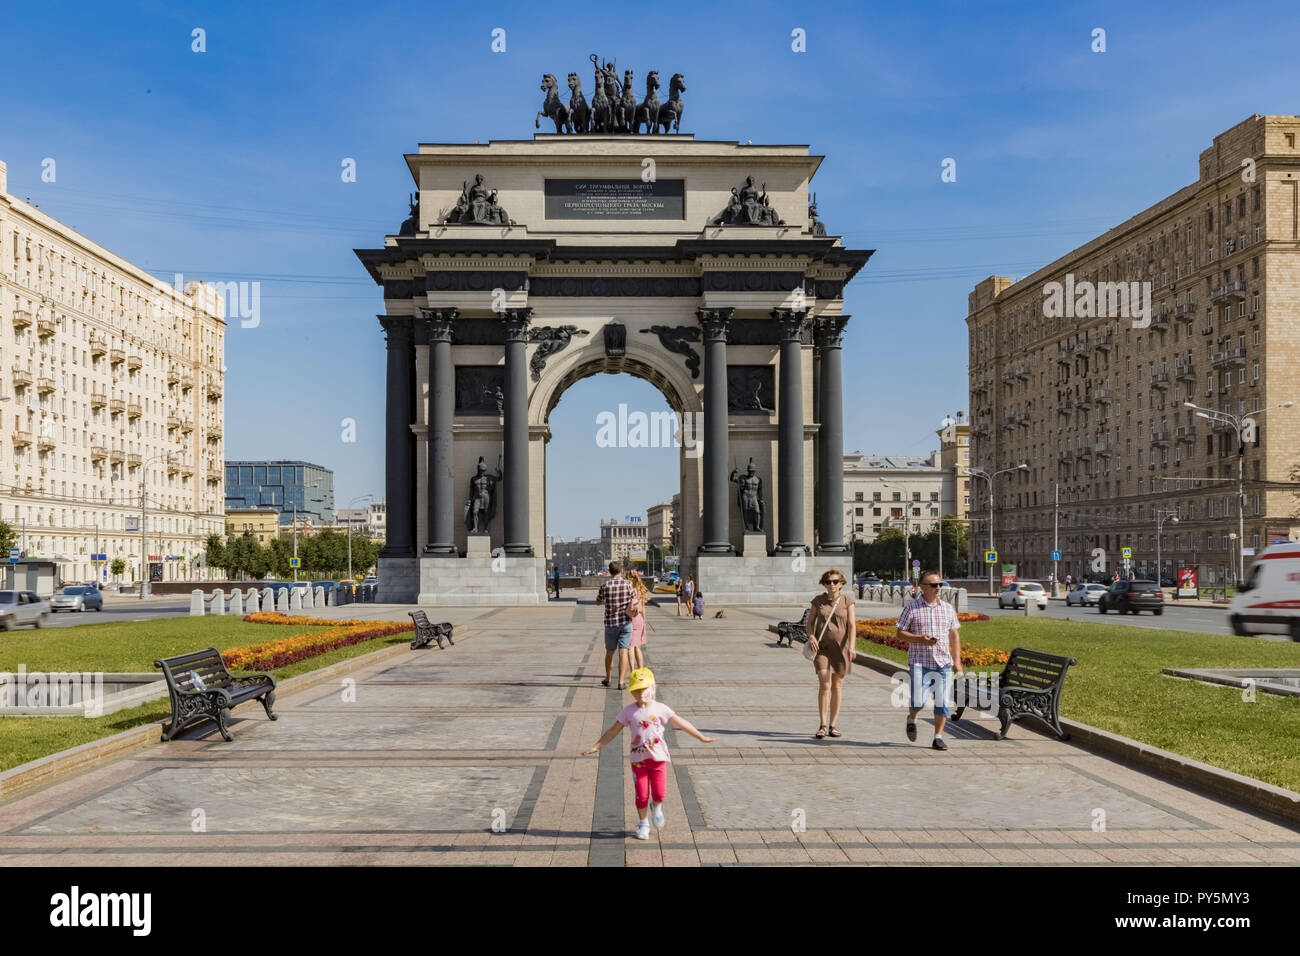 Moscow, Moscow, Russia. 26th Aug, 2018. Moscow Triumphal Gates (Triumphal arch) ''” a triumphal arch in Moscow. Are for the first time built in 1829 ''” 1834 on the project of the architect O.I. Bowe at Tverskaya Zastava Square in honor of defeat of troops of Napoleon and a victory of the Russian people in Patriotic war of 1812. Are sorted in 1936. The copy of gate is built in 1966 ''” 1968 on V.Ya. Libson's project on Kutuzovsky Avenue, nowadays ''” Victory Squares Credit: Alexey Bychkov/ZUMA Wire/Alamy Live News Stock Photo